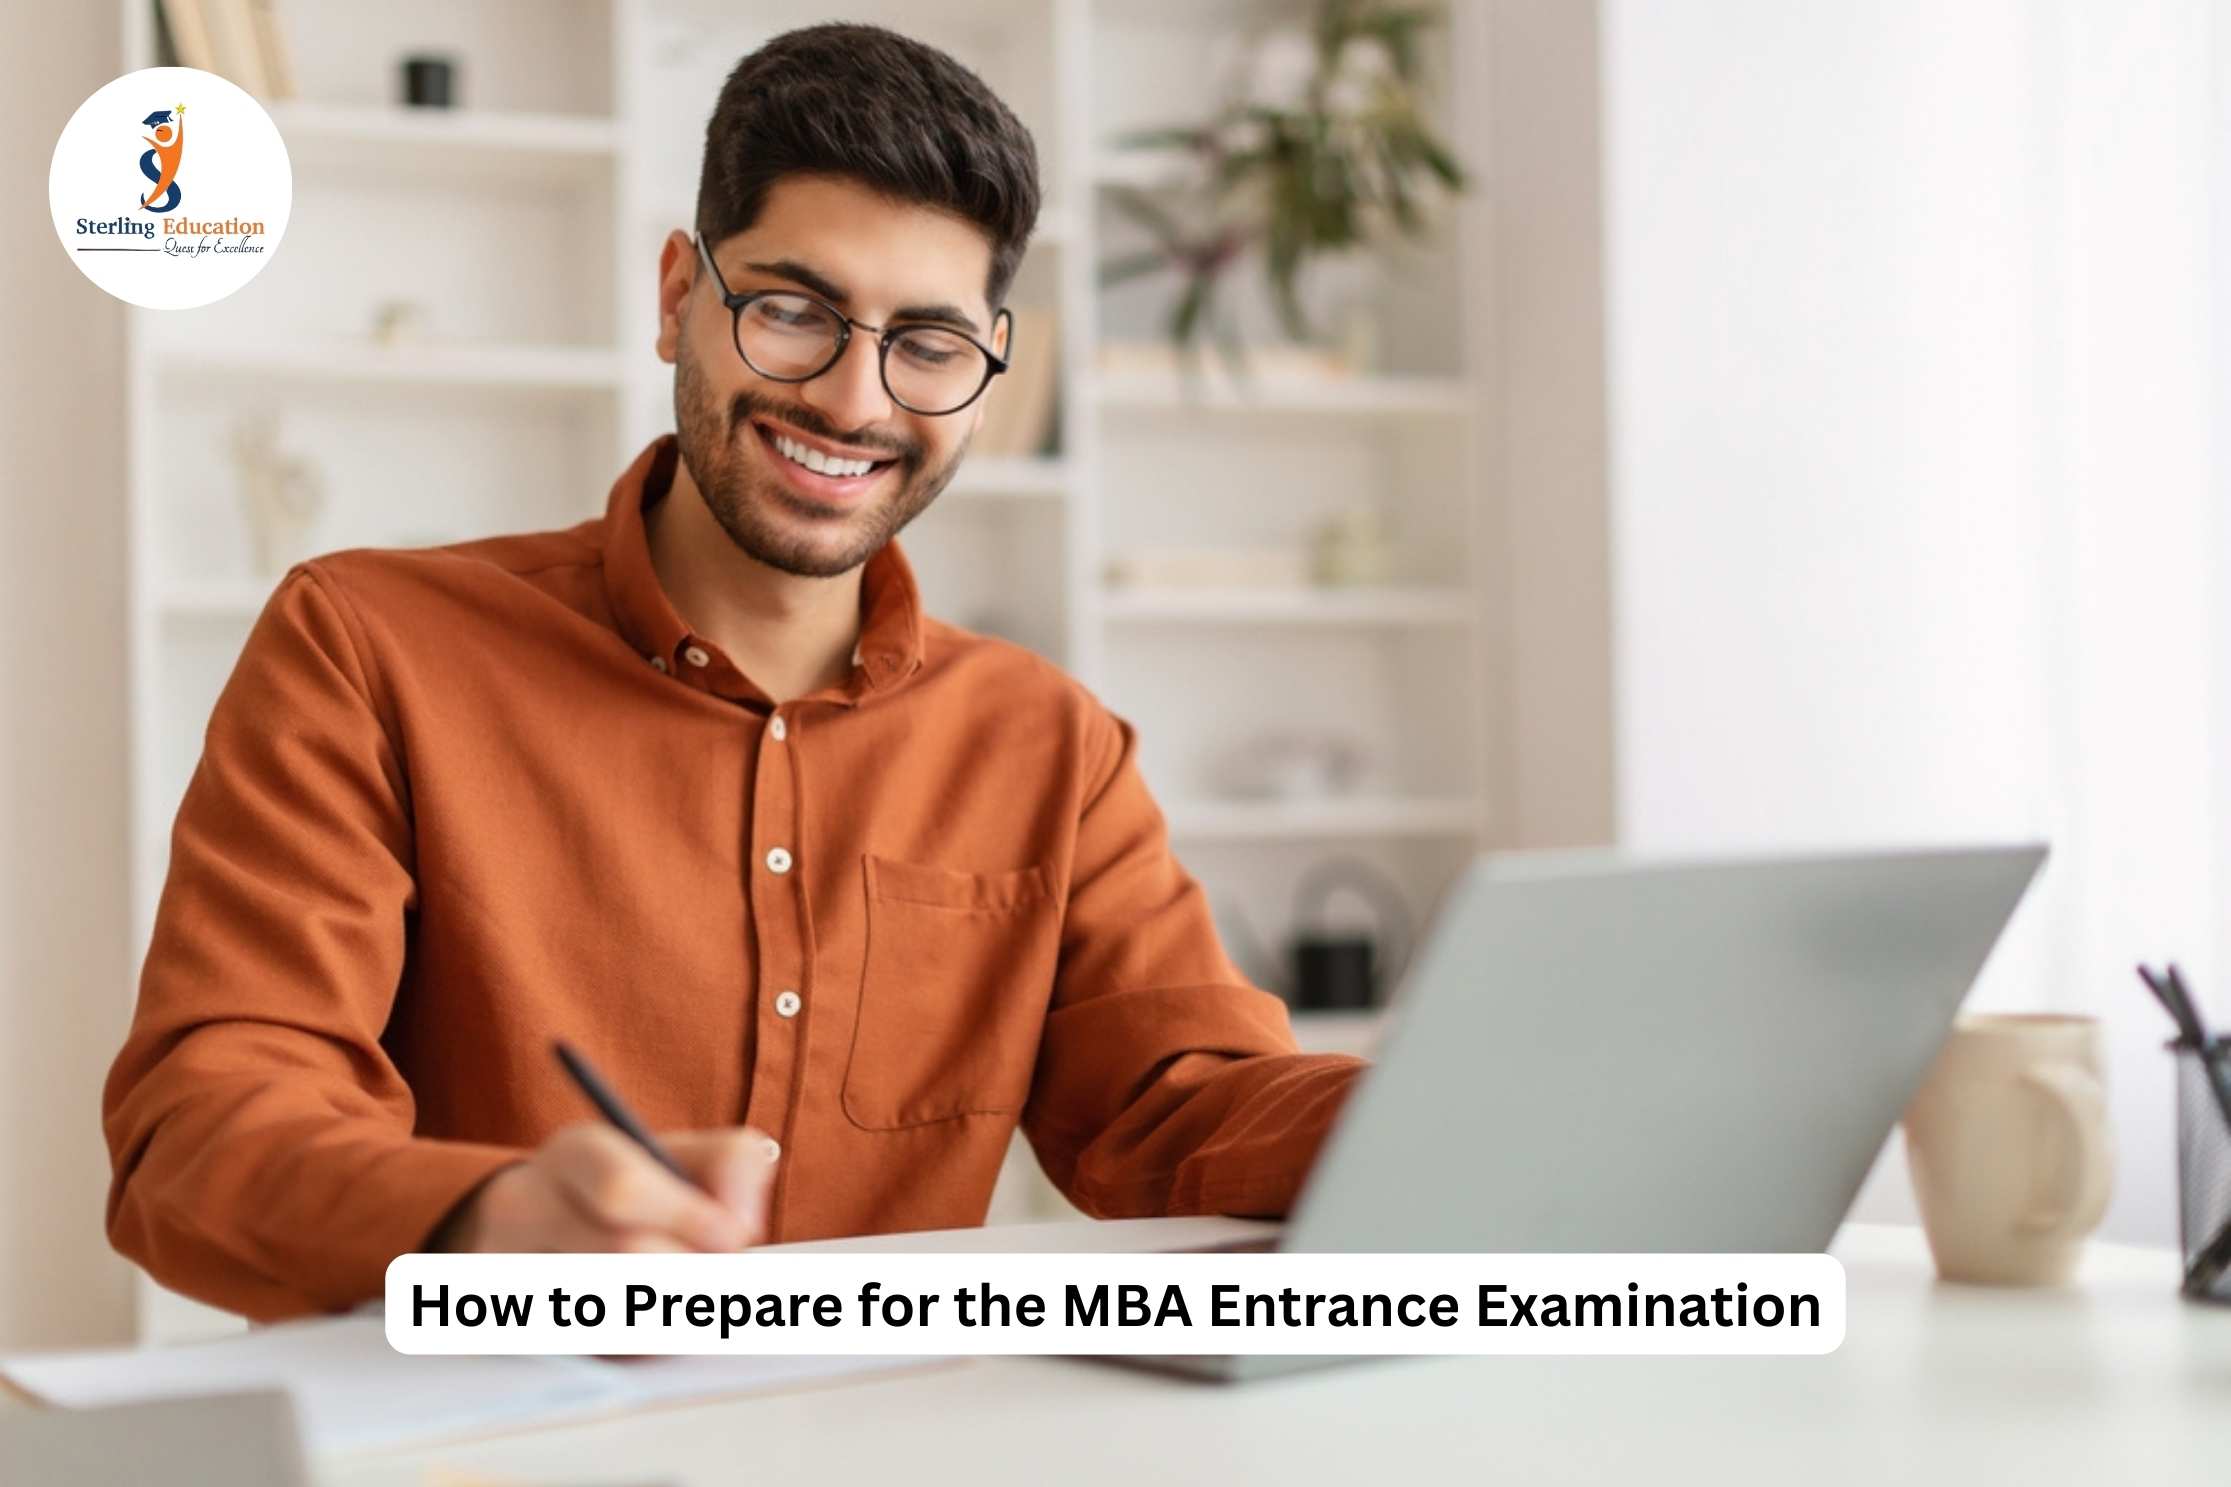 How to Prepare for the MBA Entrance Examination